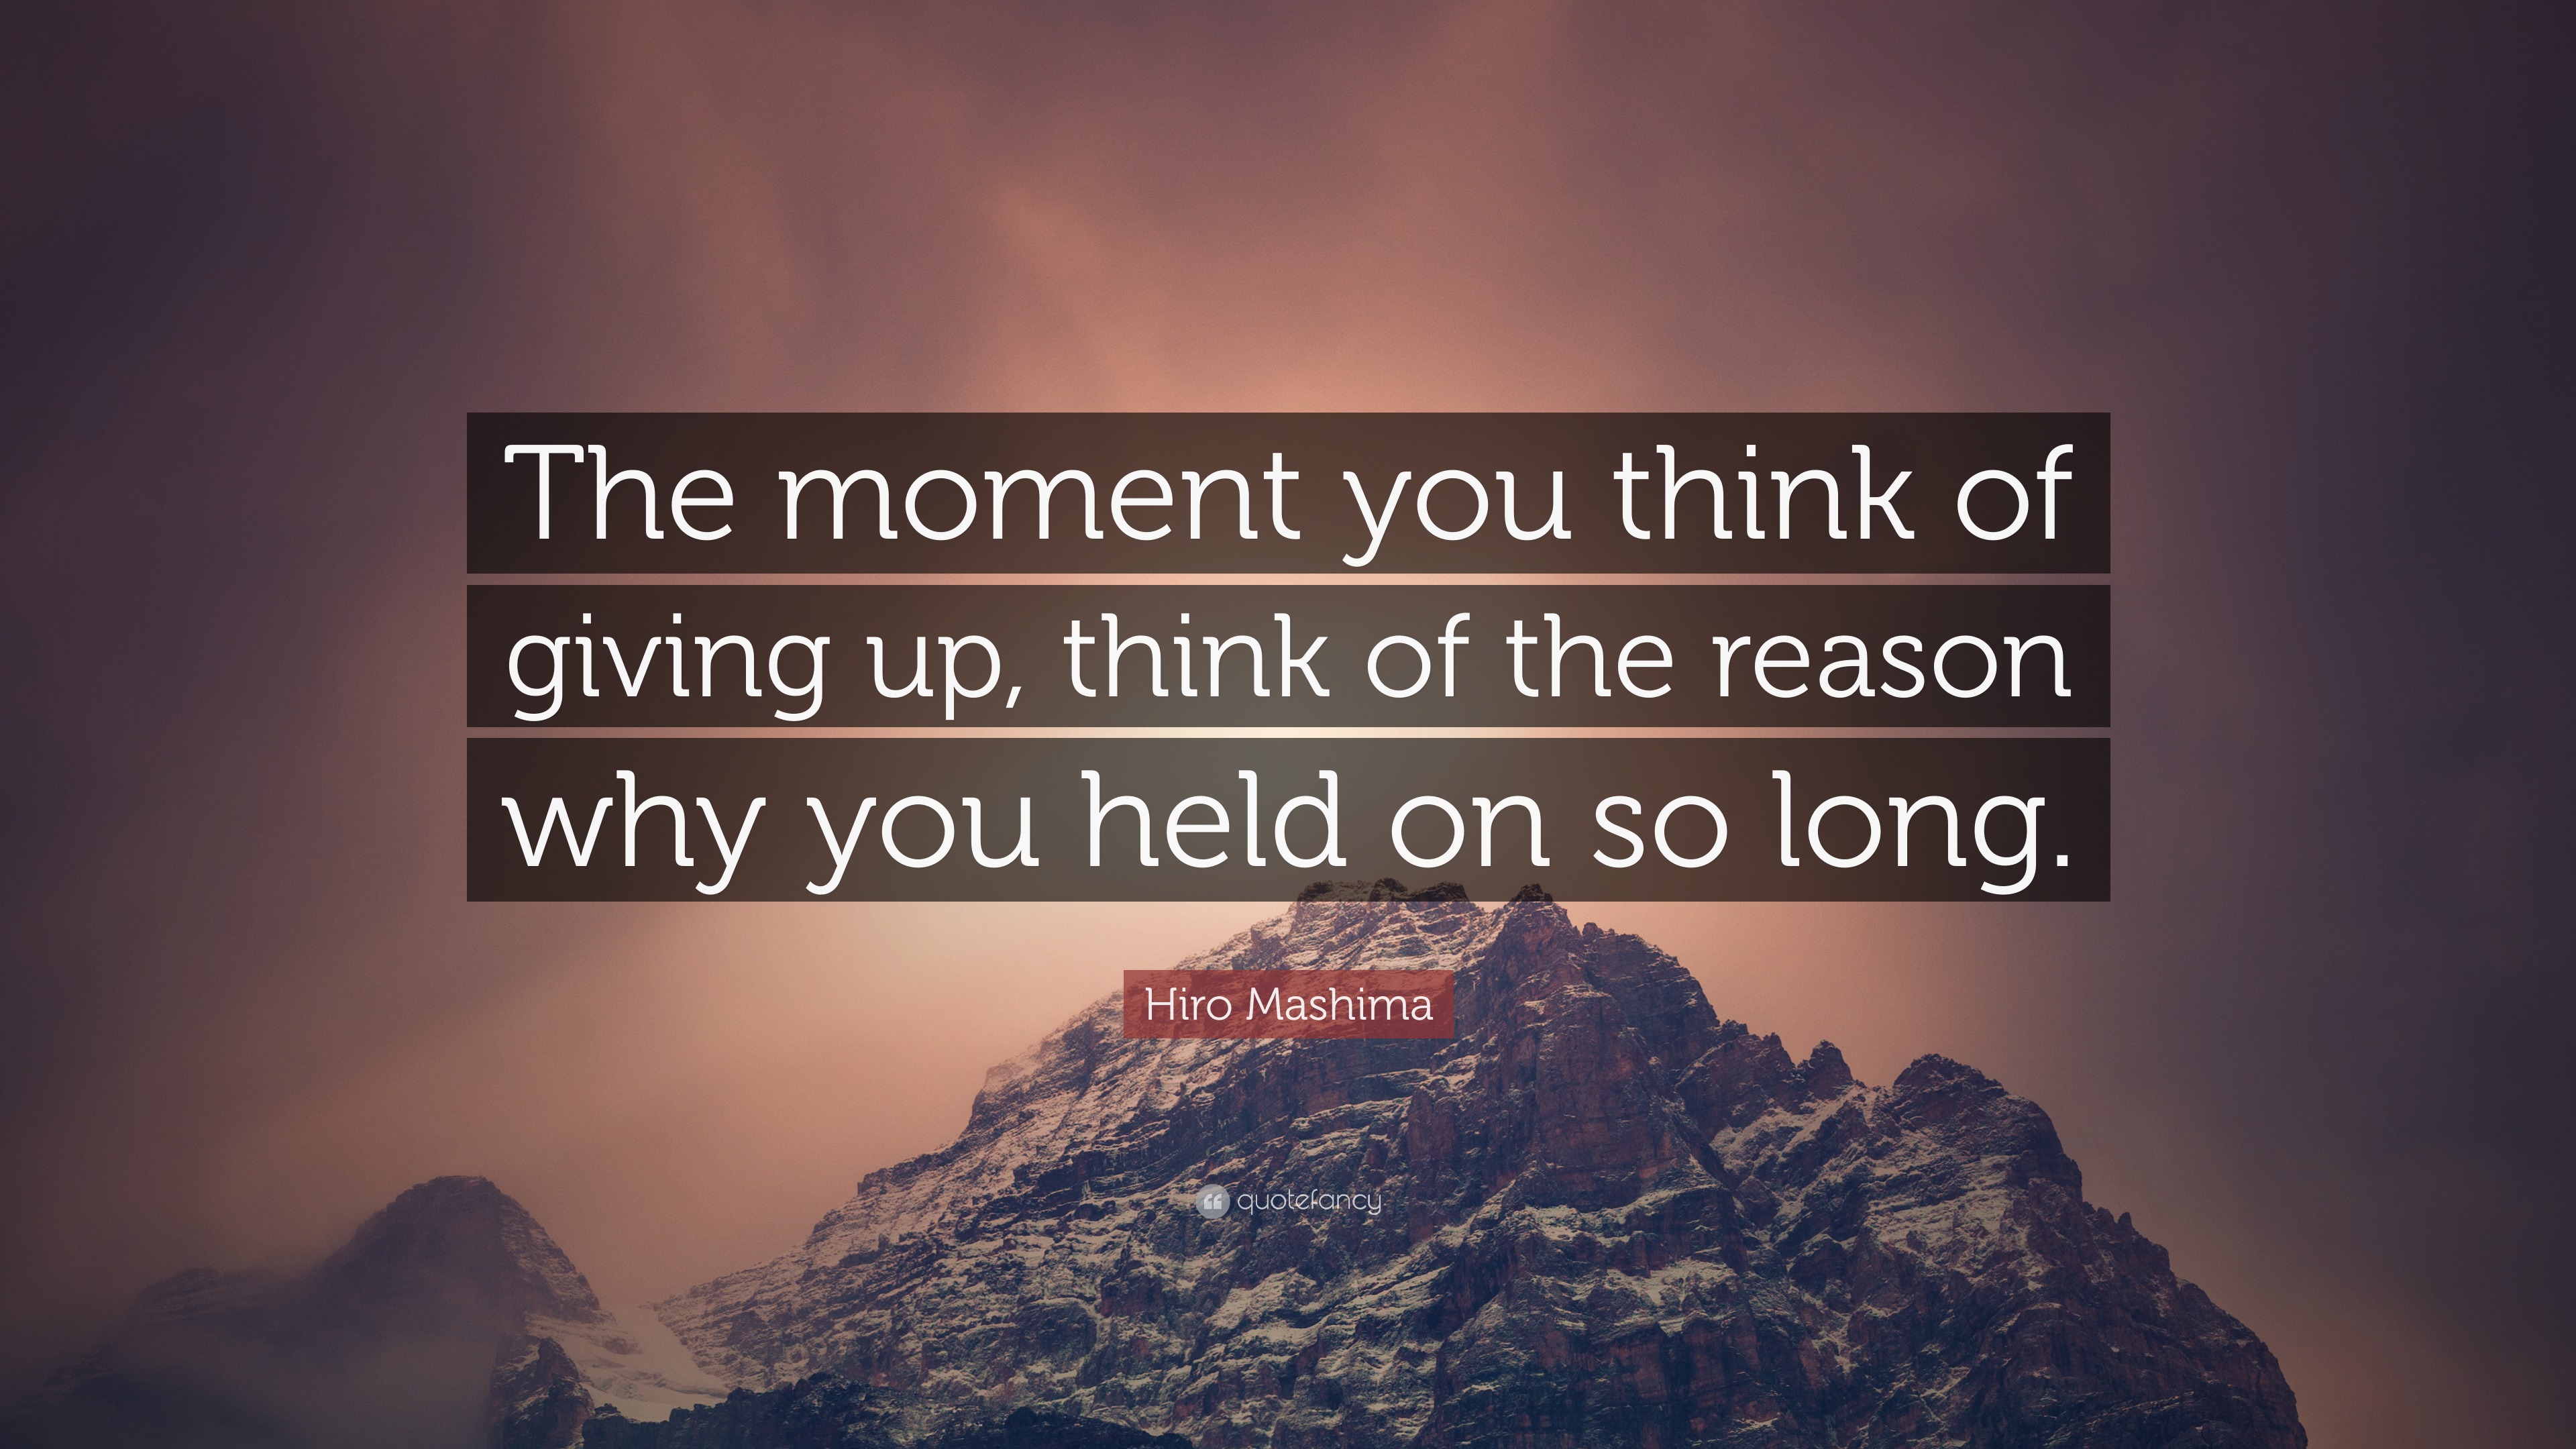 Hiro Mashima Quote: “The moment you think of giving up, think of the ...